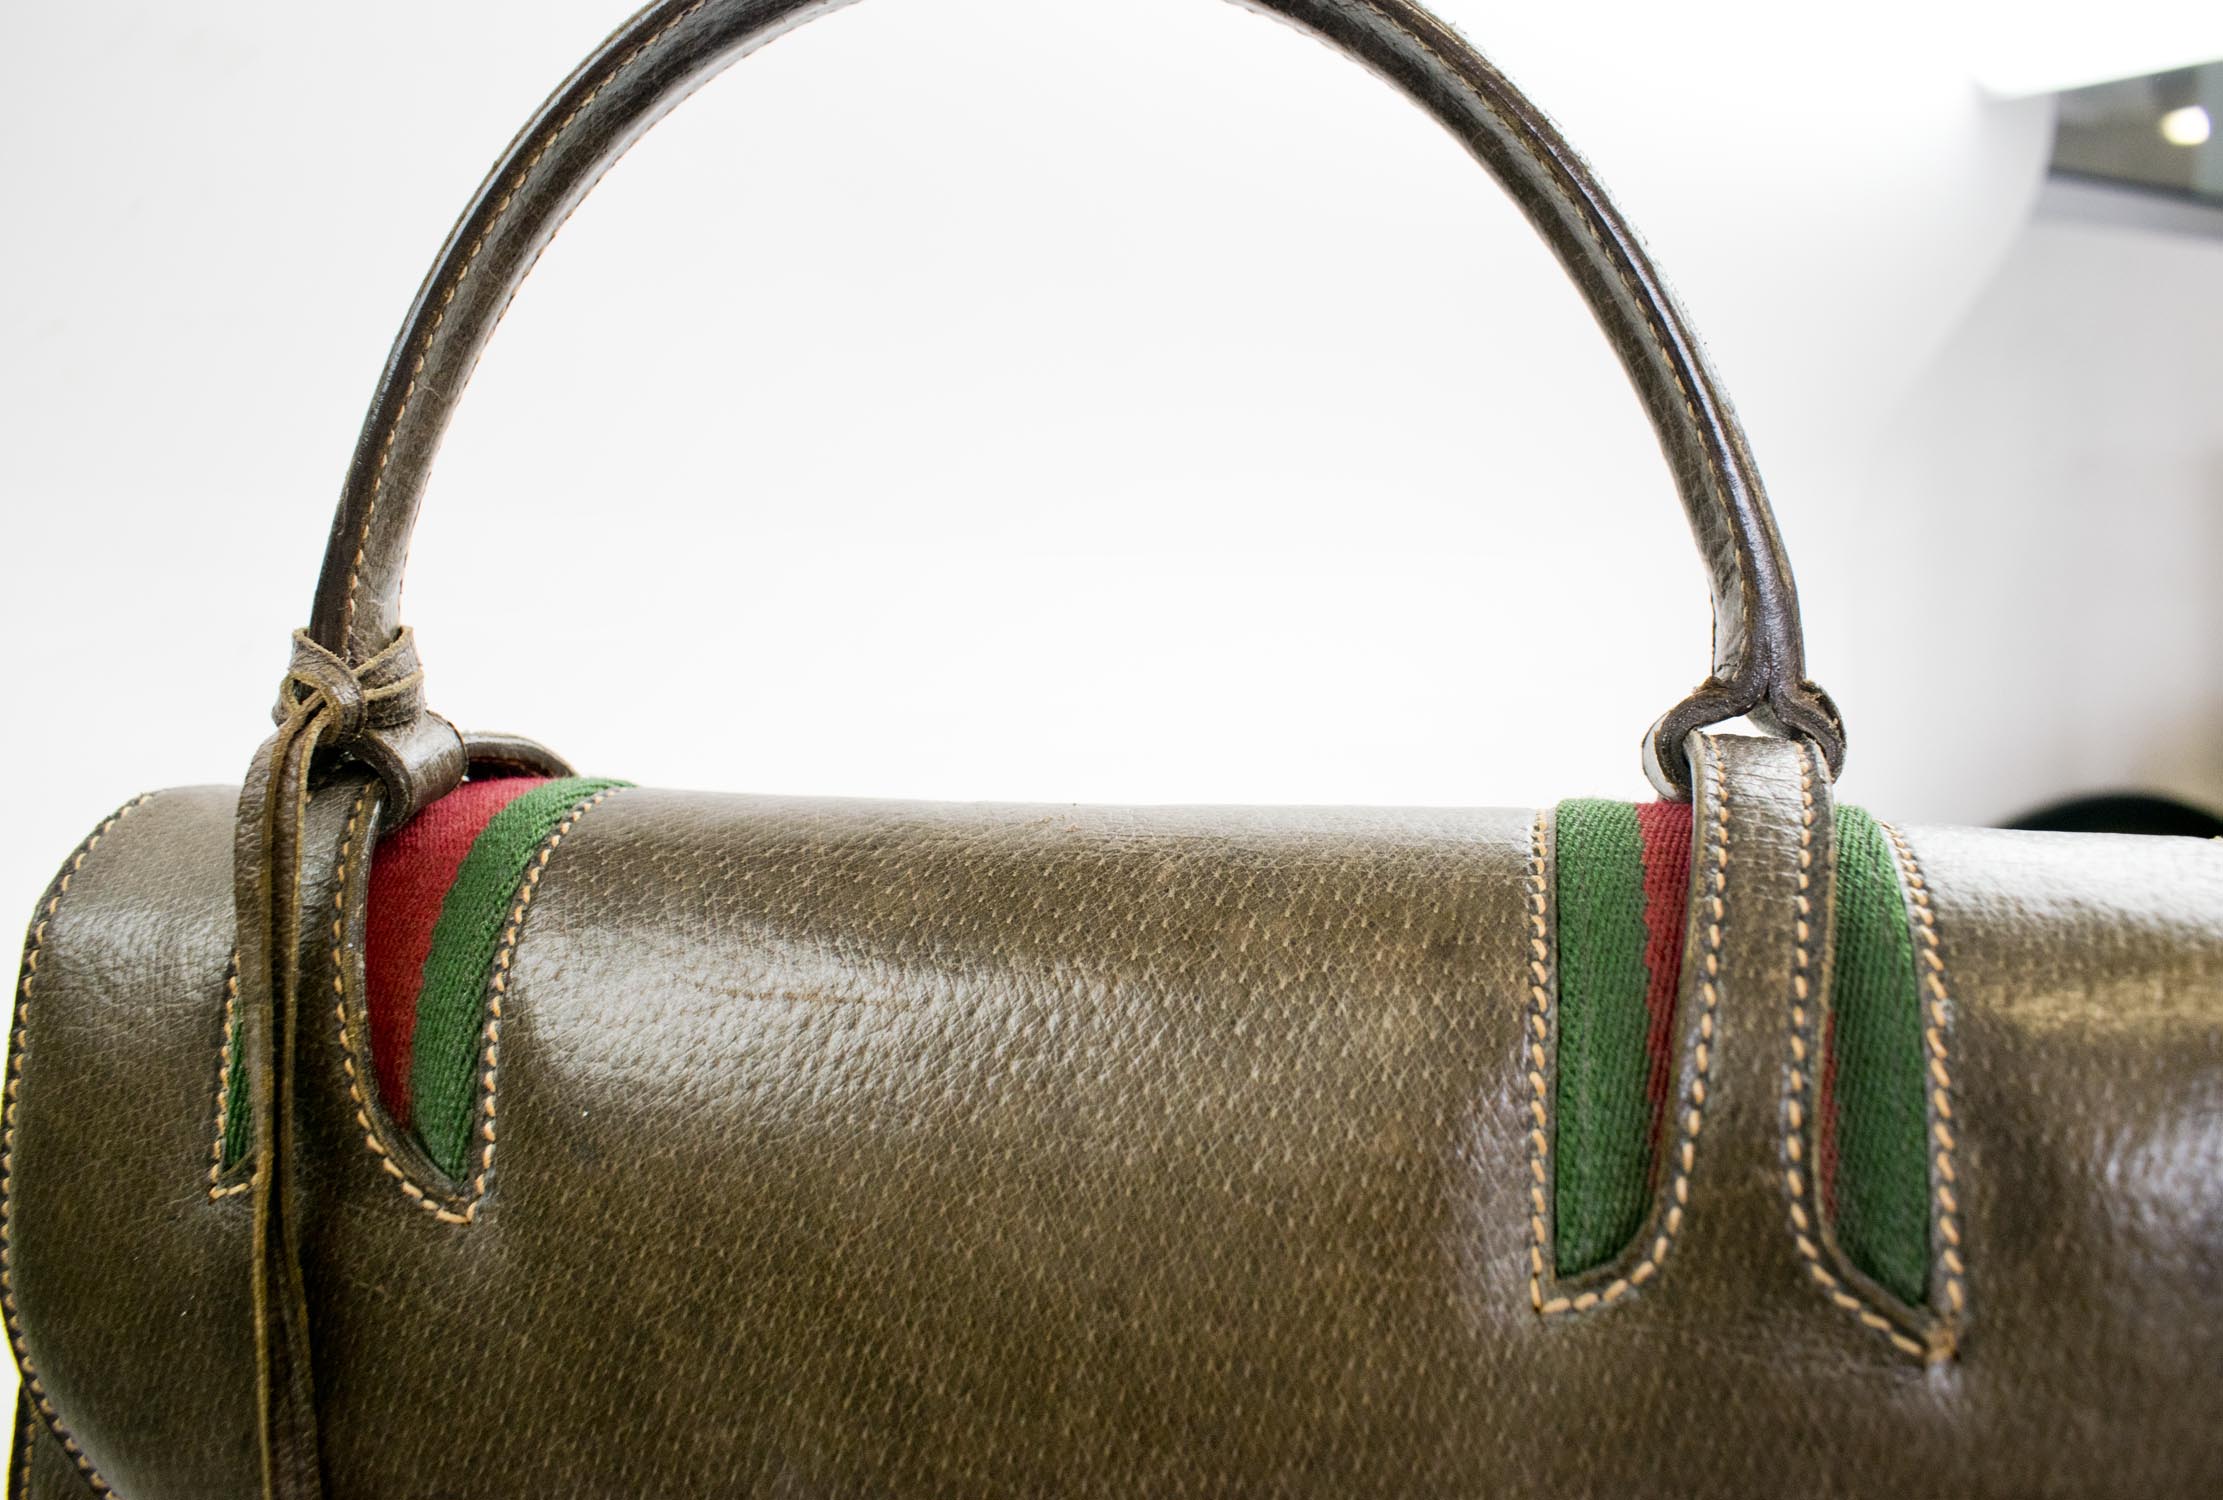 GUCCI VINTAGE BAGS, brown leather with single top handle, padlock, key and purse, iconic green